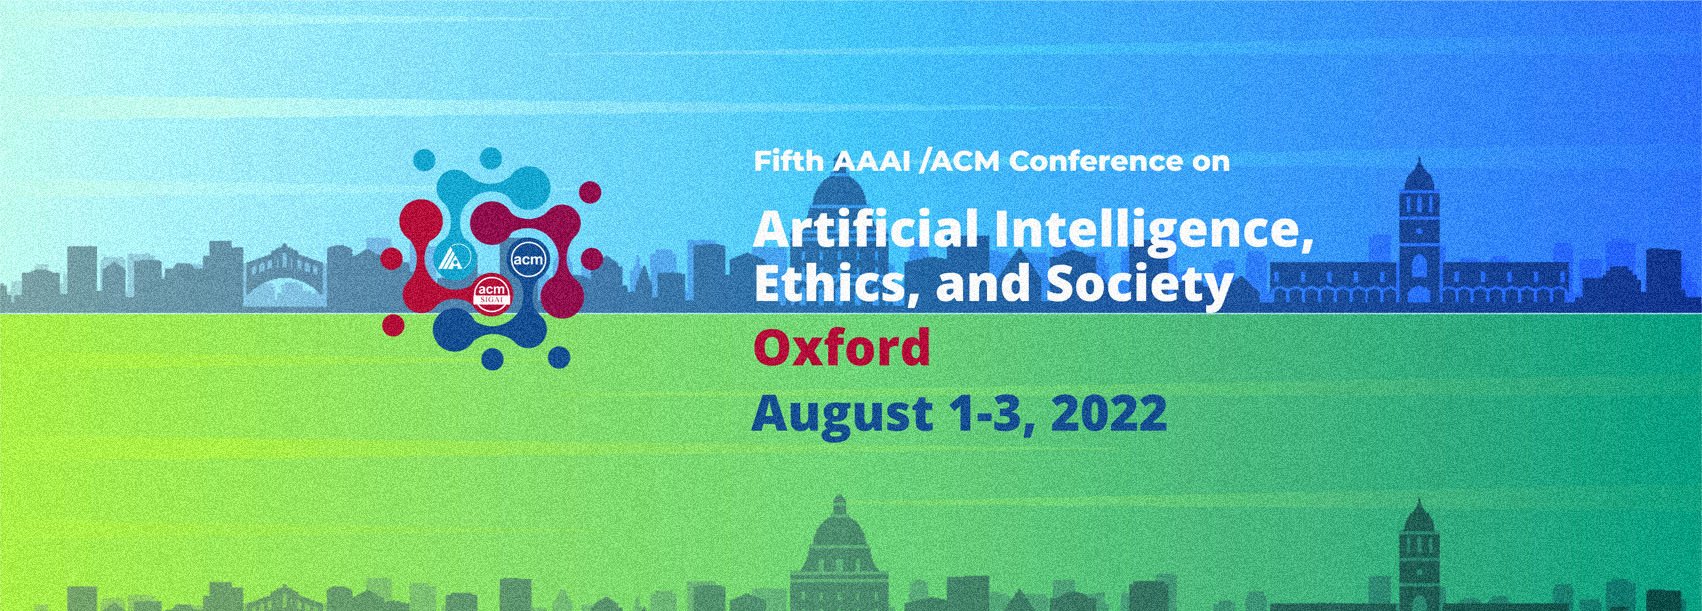 AAAI/ACM Conference on Artificial Intelligence, Ethics and Society